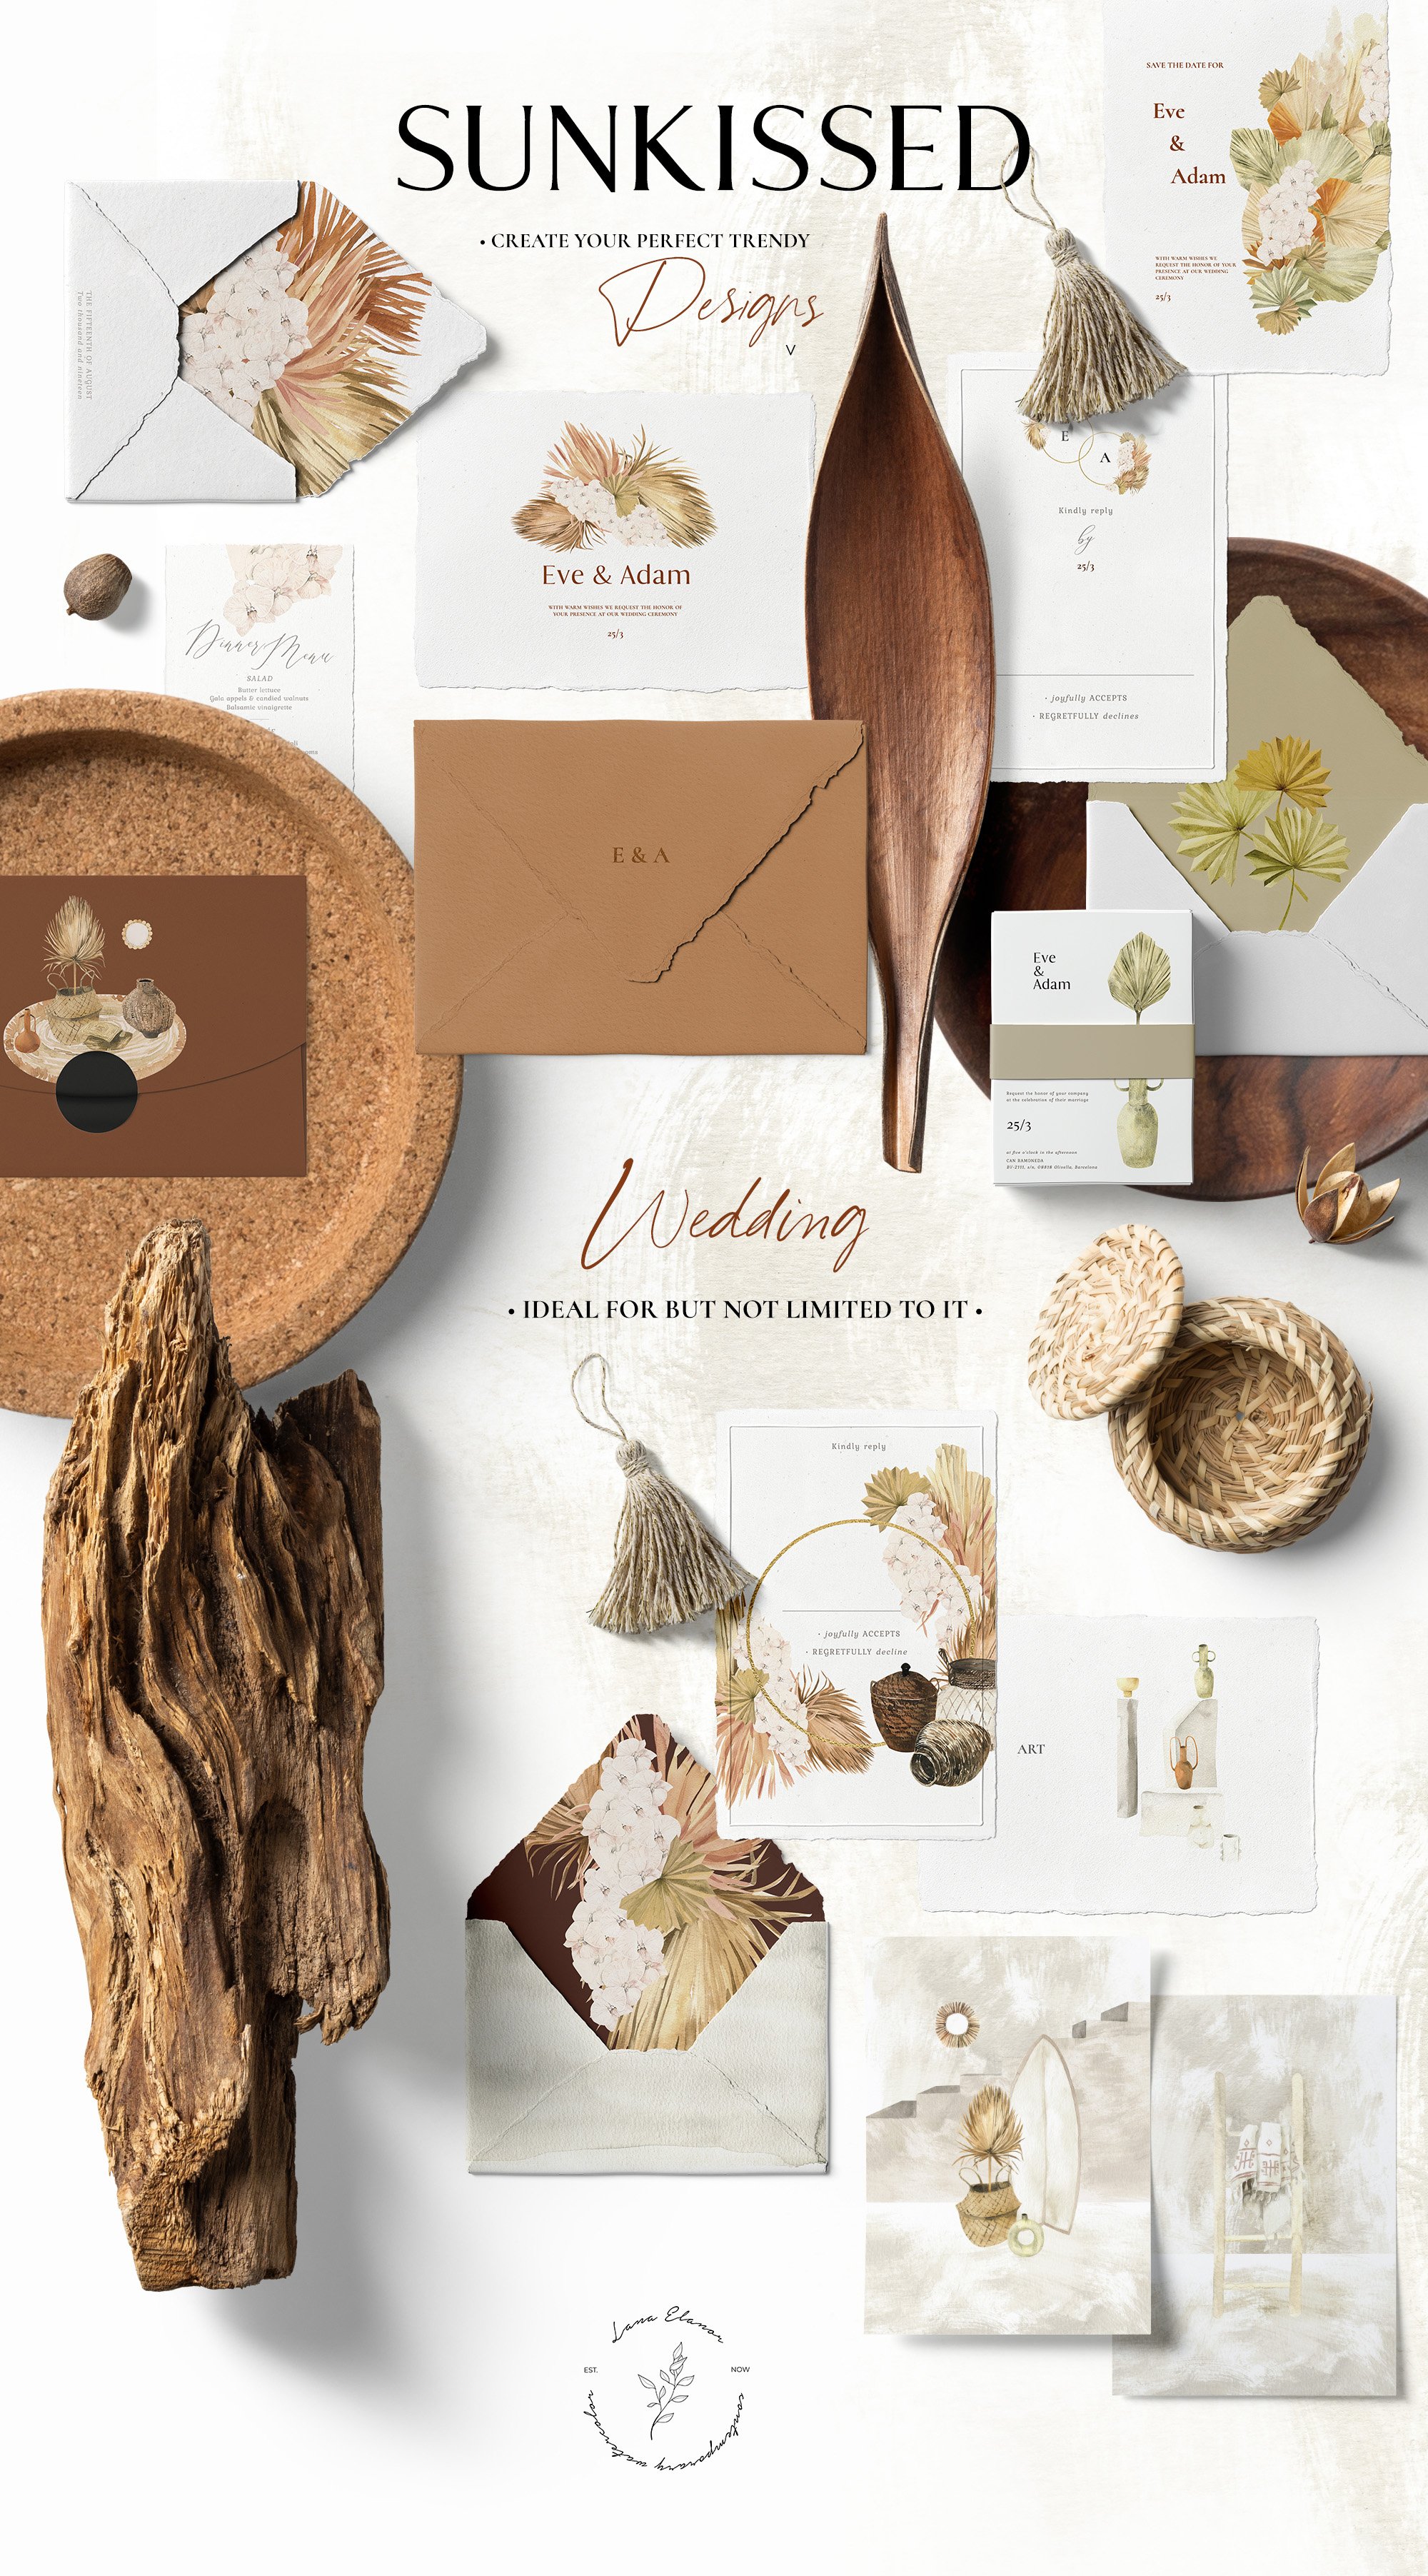 Sunkissed Dried Palms and Boho Interiors